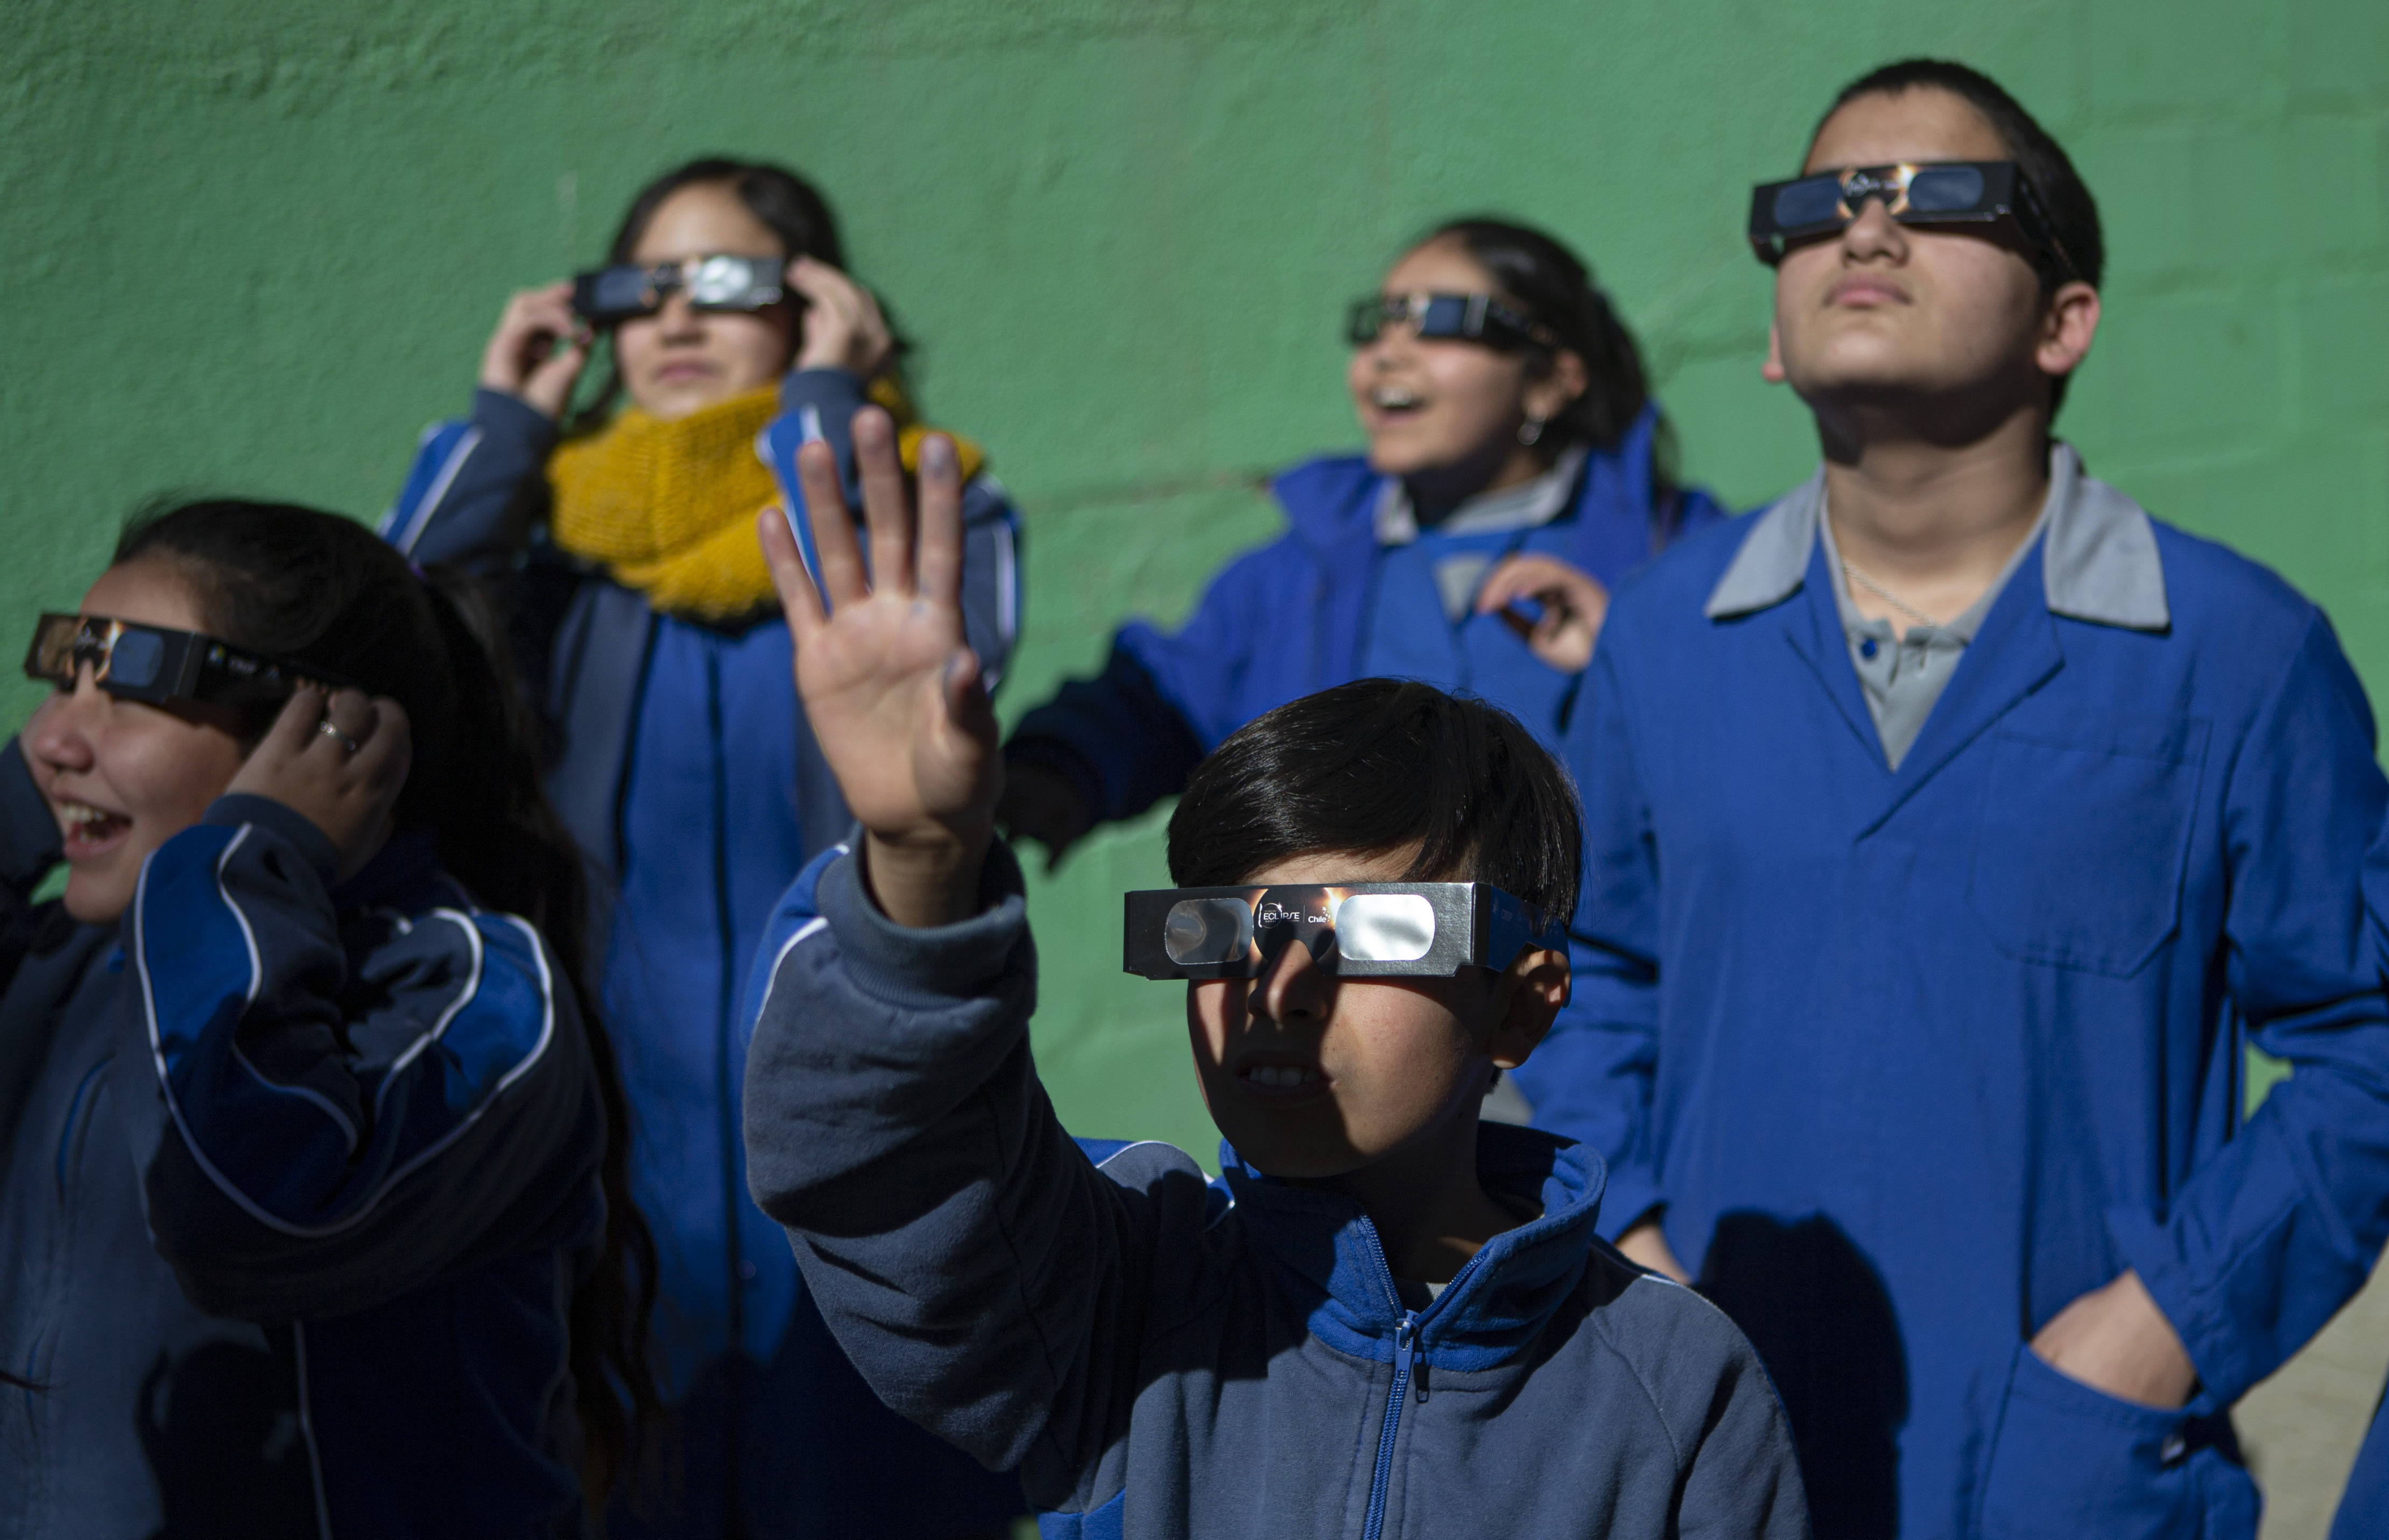 Children test on their special glasses for tomorrow's total solar eclipse at Pedro Pablo Munoz school in La Higuera, Chile, Monday, July 1, 2019. Tourists and scientists will gather in northern Chile, one of the best places in the world to watch the next the eclipse that will plunge parts of South America into darkness. (AP Photo/Esteban Felix)